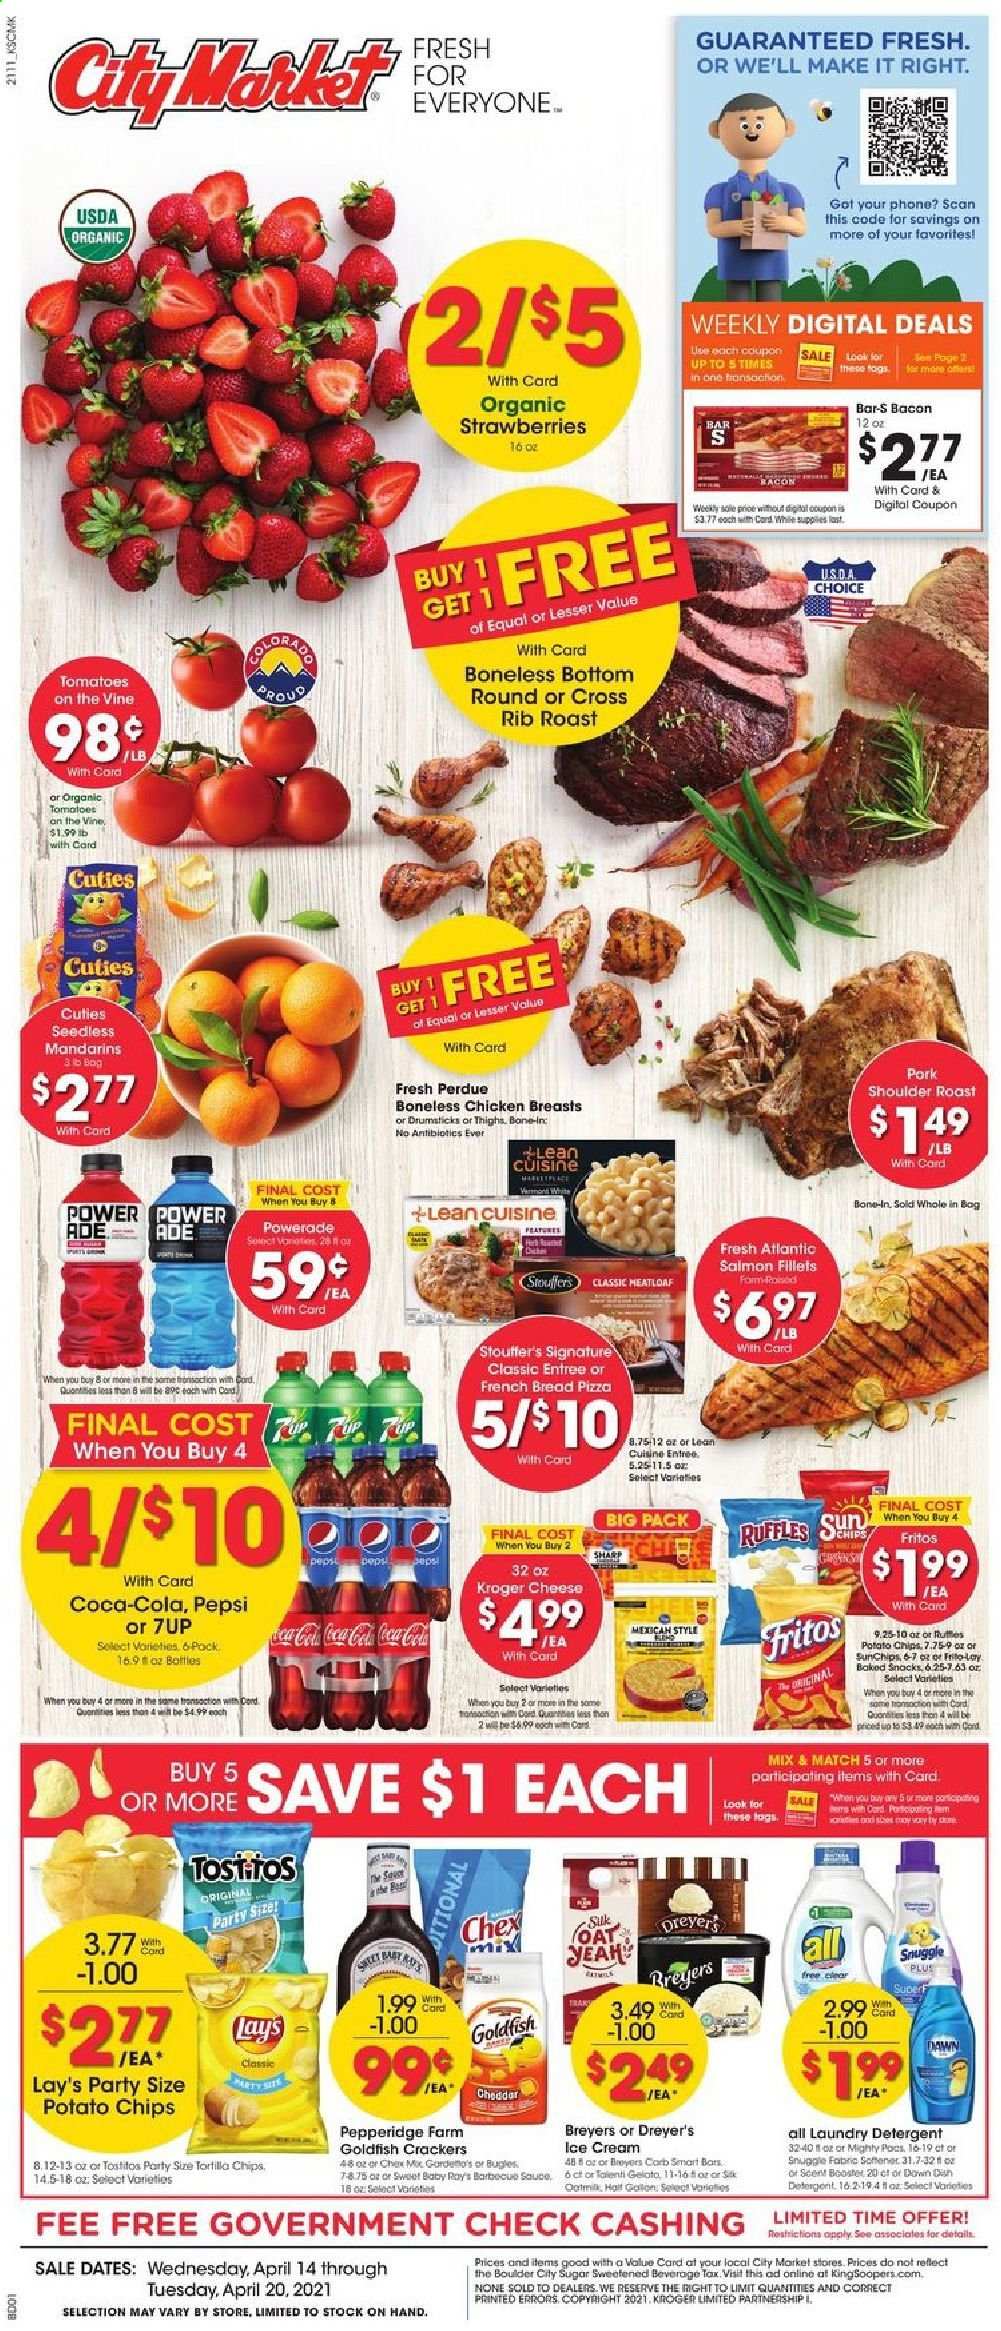 thumbnail - City Market Flyer - 04/14/2021 - 04/20/2021 - Sales products - bread, tomatoes, mandarines, strawberries, salmon, salmon fillet, pizza, Lean Cuisine, Perdue®, bacon, ice cream, gelato, snack, crackers, Fritos, potato chips, chips, Lay’s, Goldfish, Ruffles, Tostitos, sugar, oats, Coca-Cola, Powerade, Pepsi, 7UP, L'Or, chicken breasts, pork meat, pork roast, pork shoulder, detergent, Snuggle, laundry detergent, Sharp. Page 1.